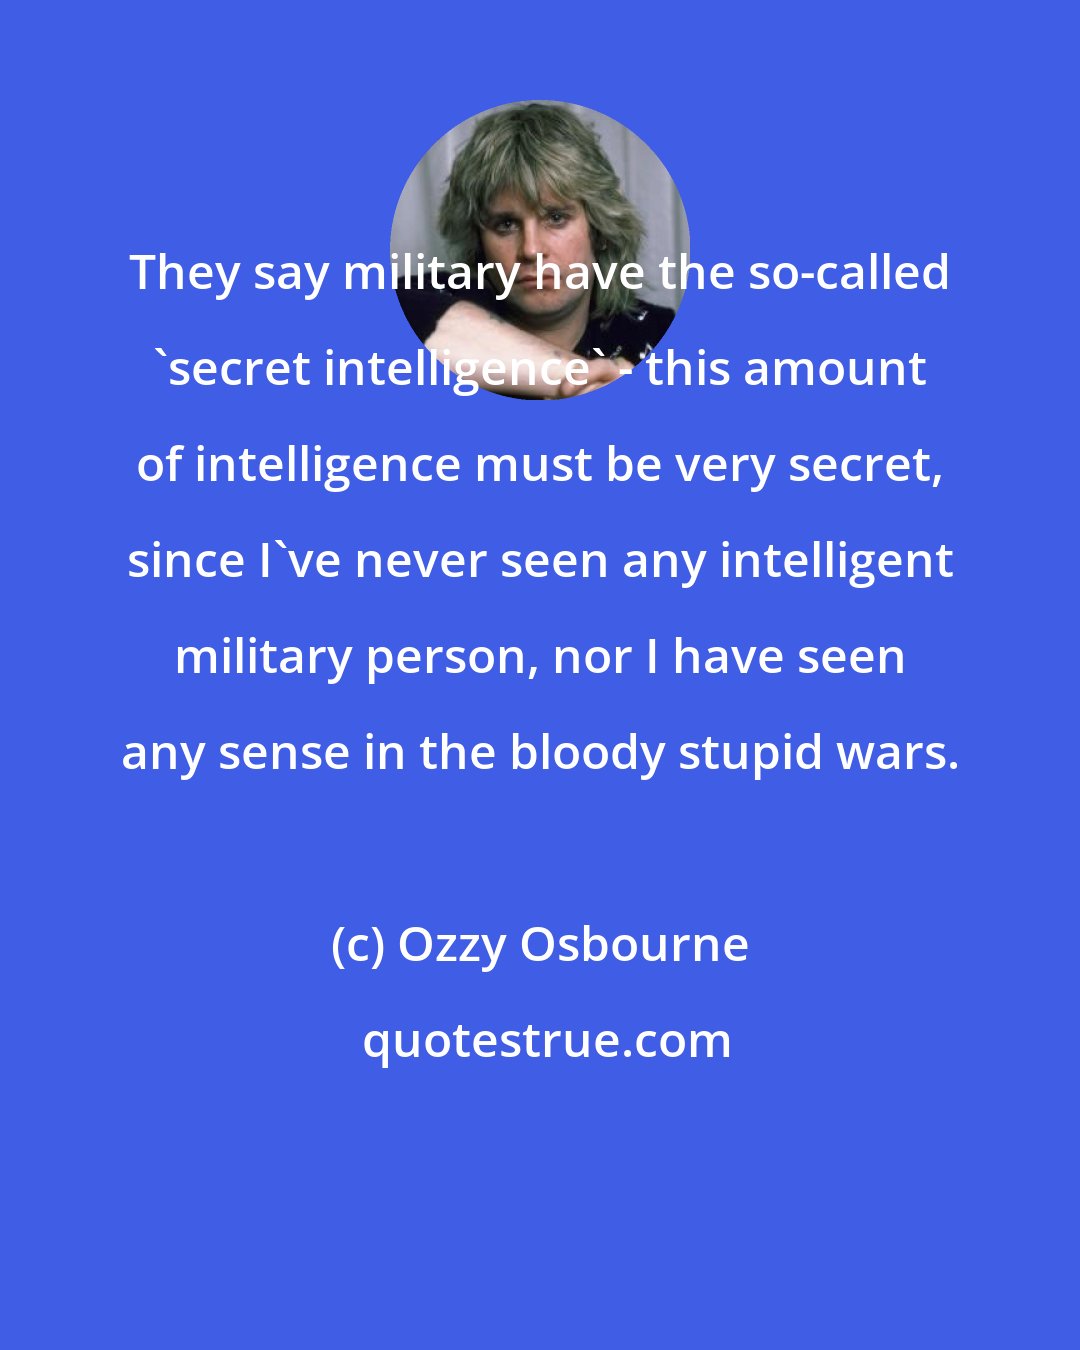 Ozzy Osbourne: They say military have the so-called 'secret intelligence' - this amount of intelligence must be very secret, since I've never seen any intelligent military person, nor I have seen any sense in the bloody stupid wars.